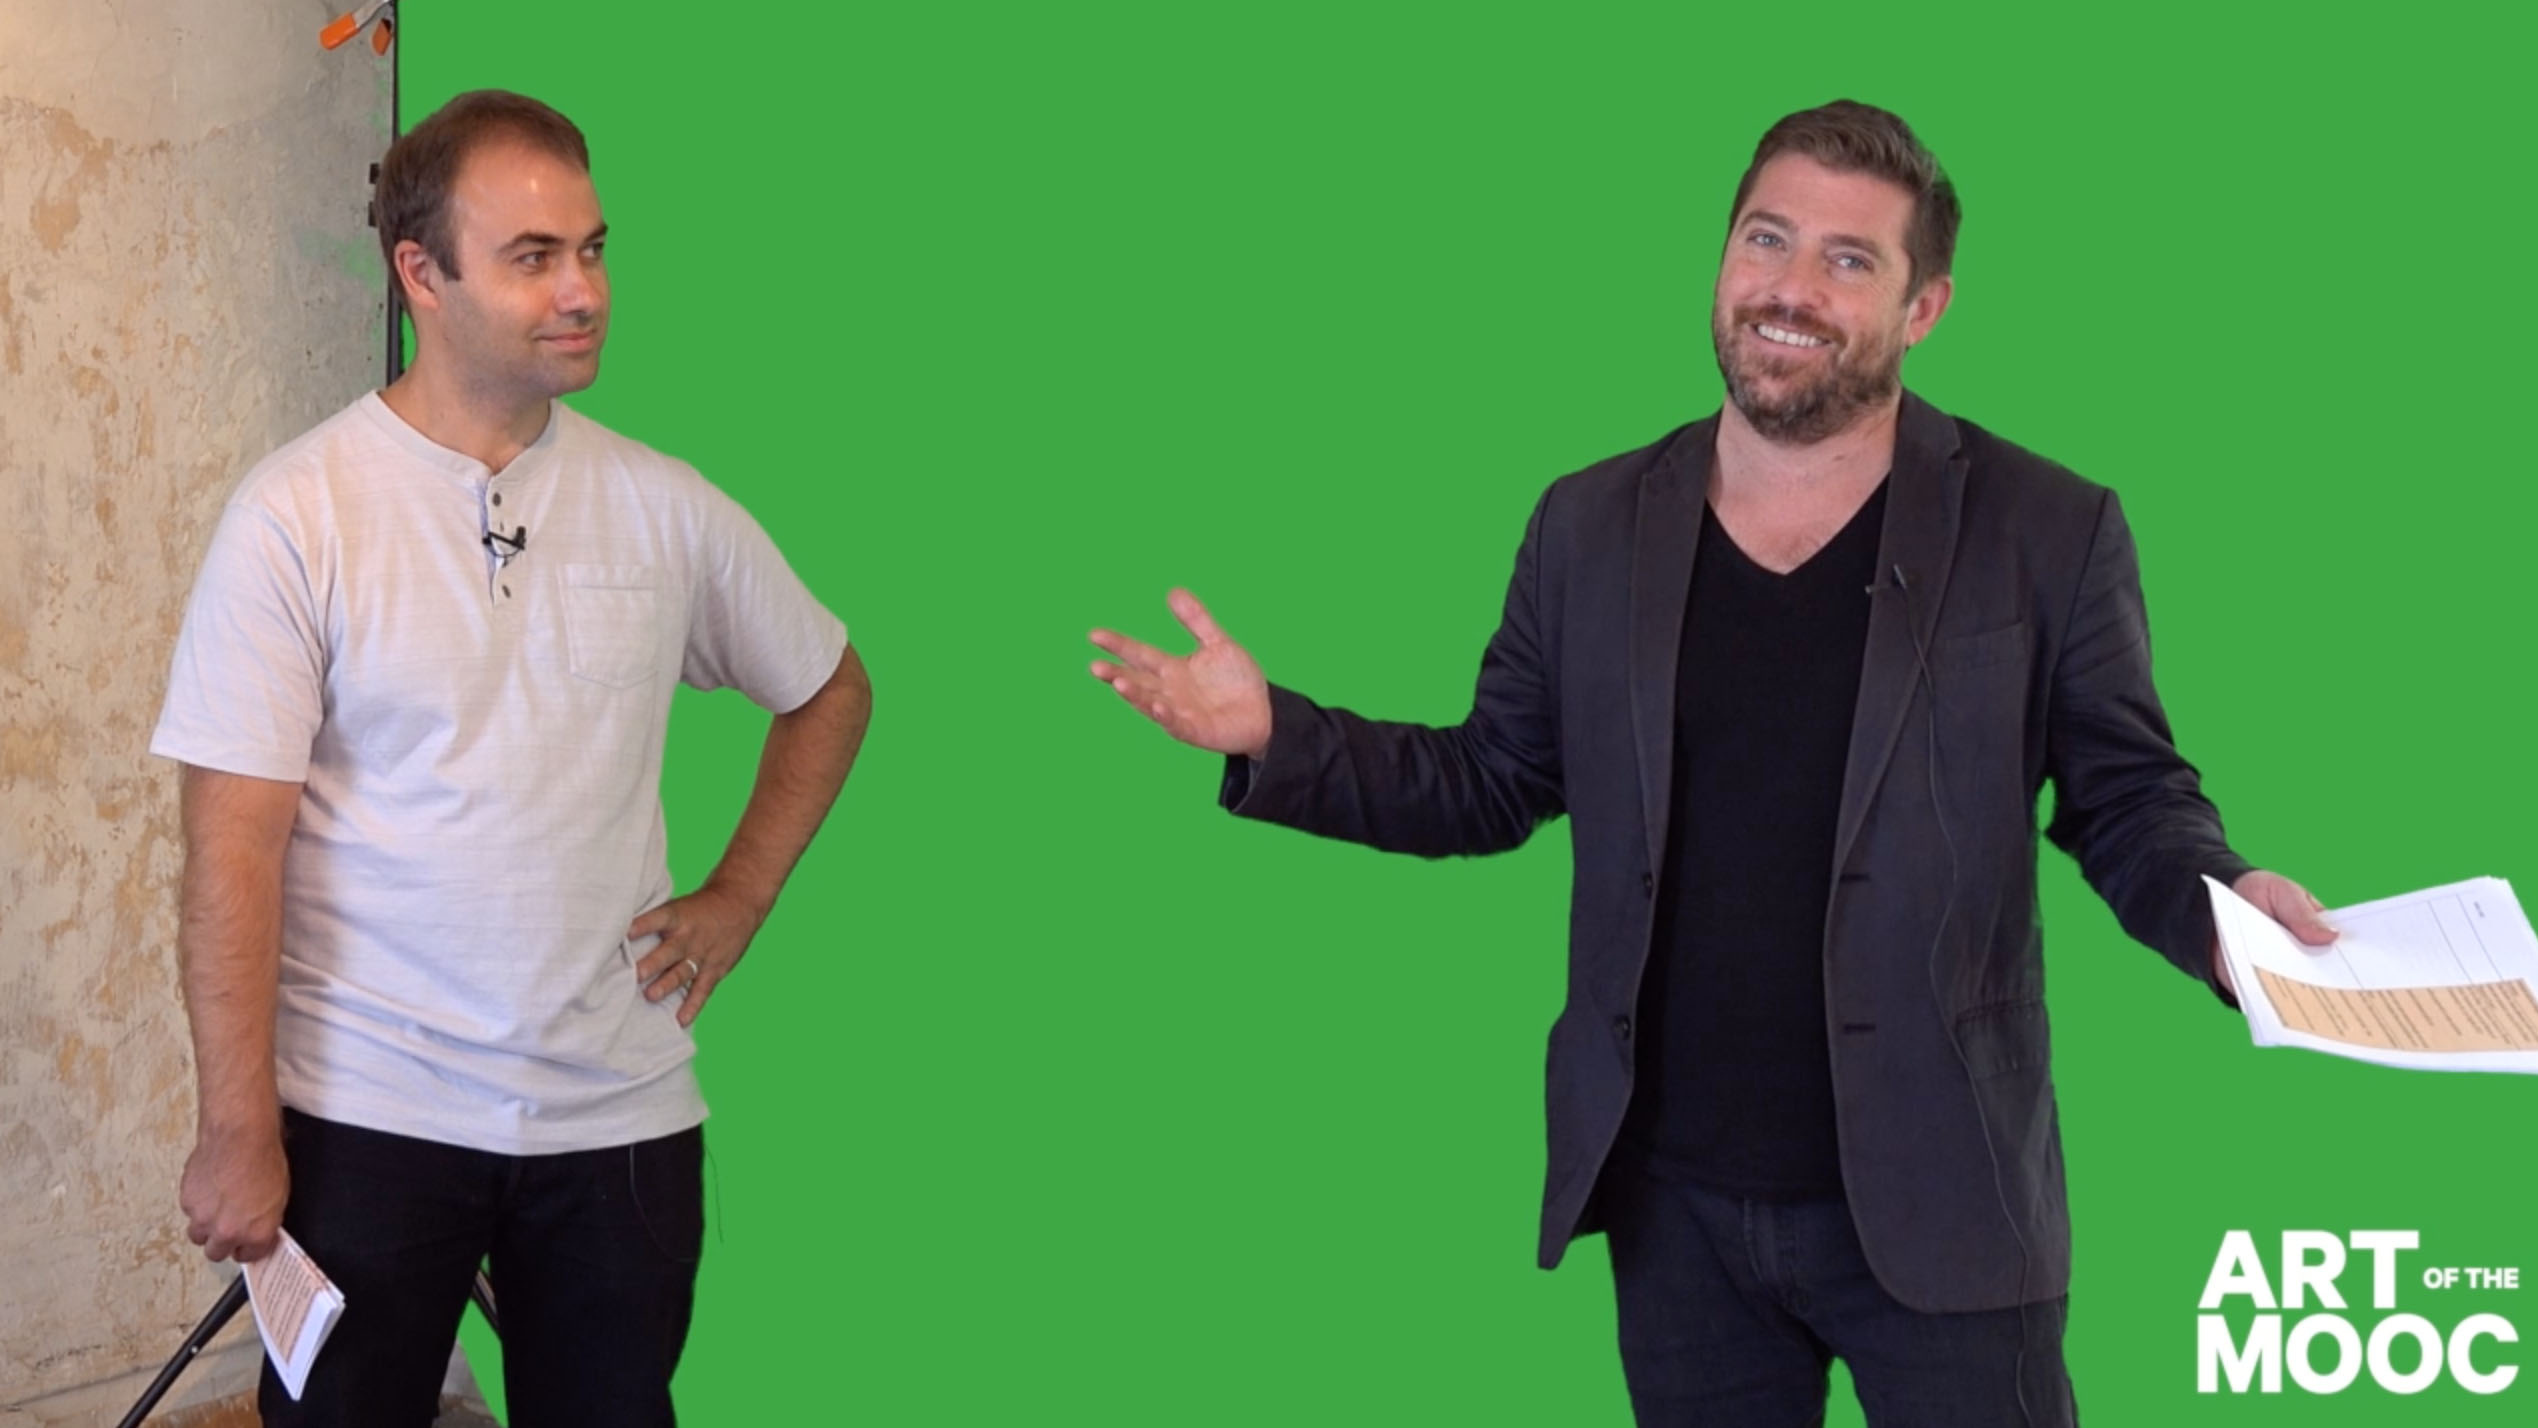 Pedro Lasch and Nato Thompson record a lecture in front of a green screen.